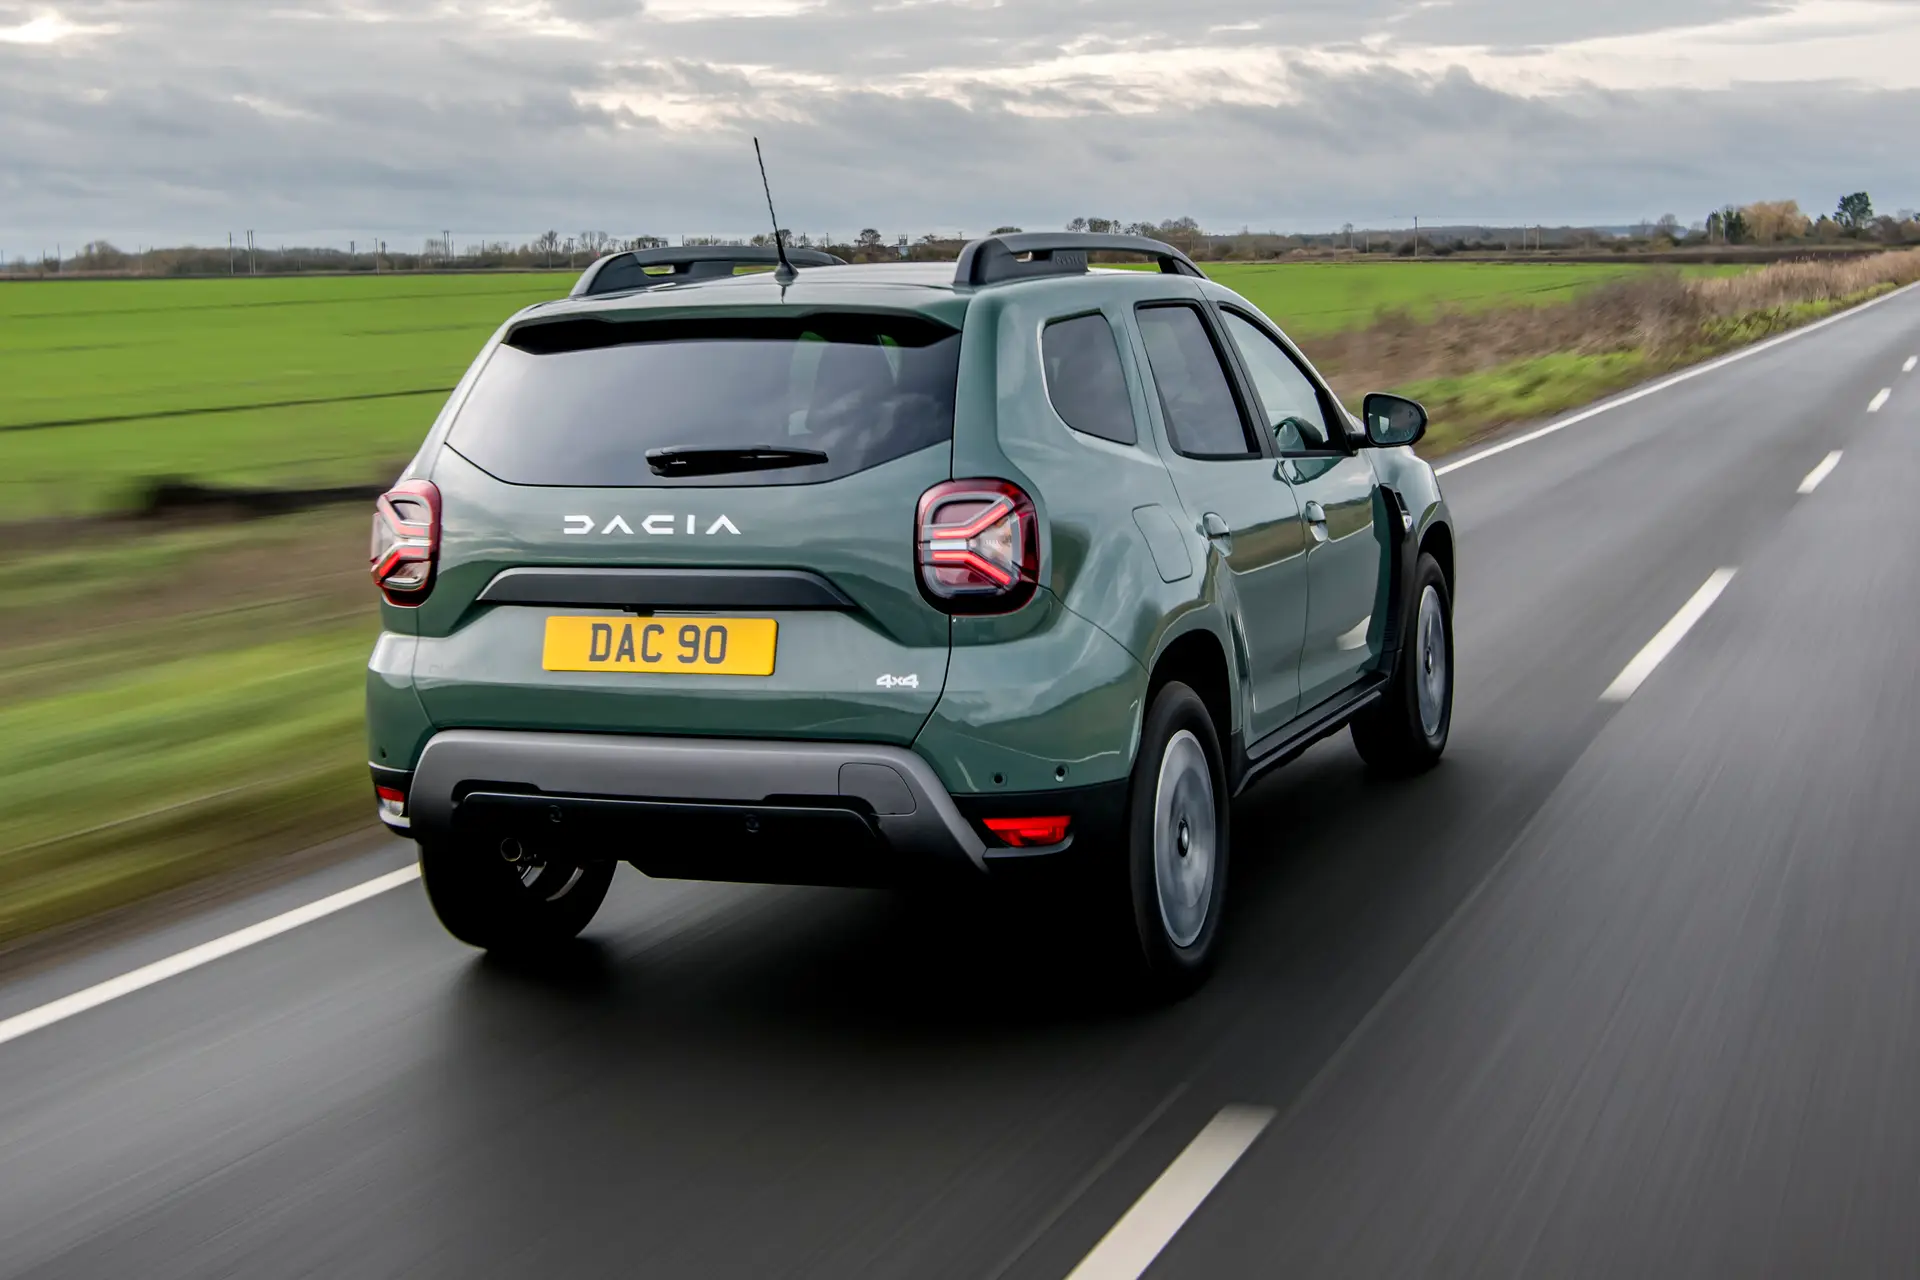 Dacia Sandero Stepway is way cooler with Drive Booster Throttle